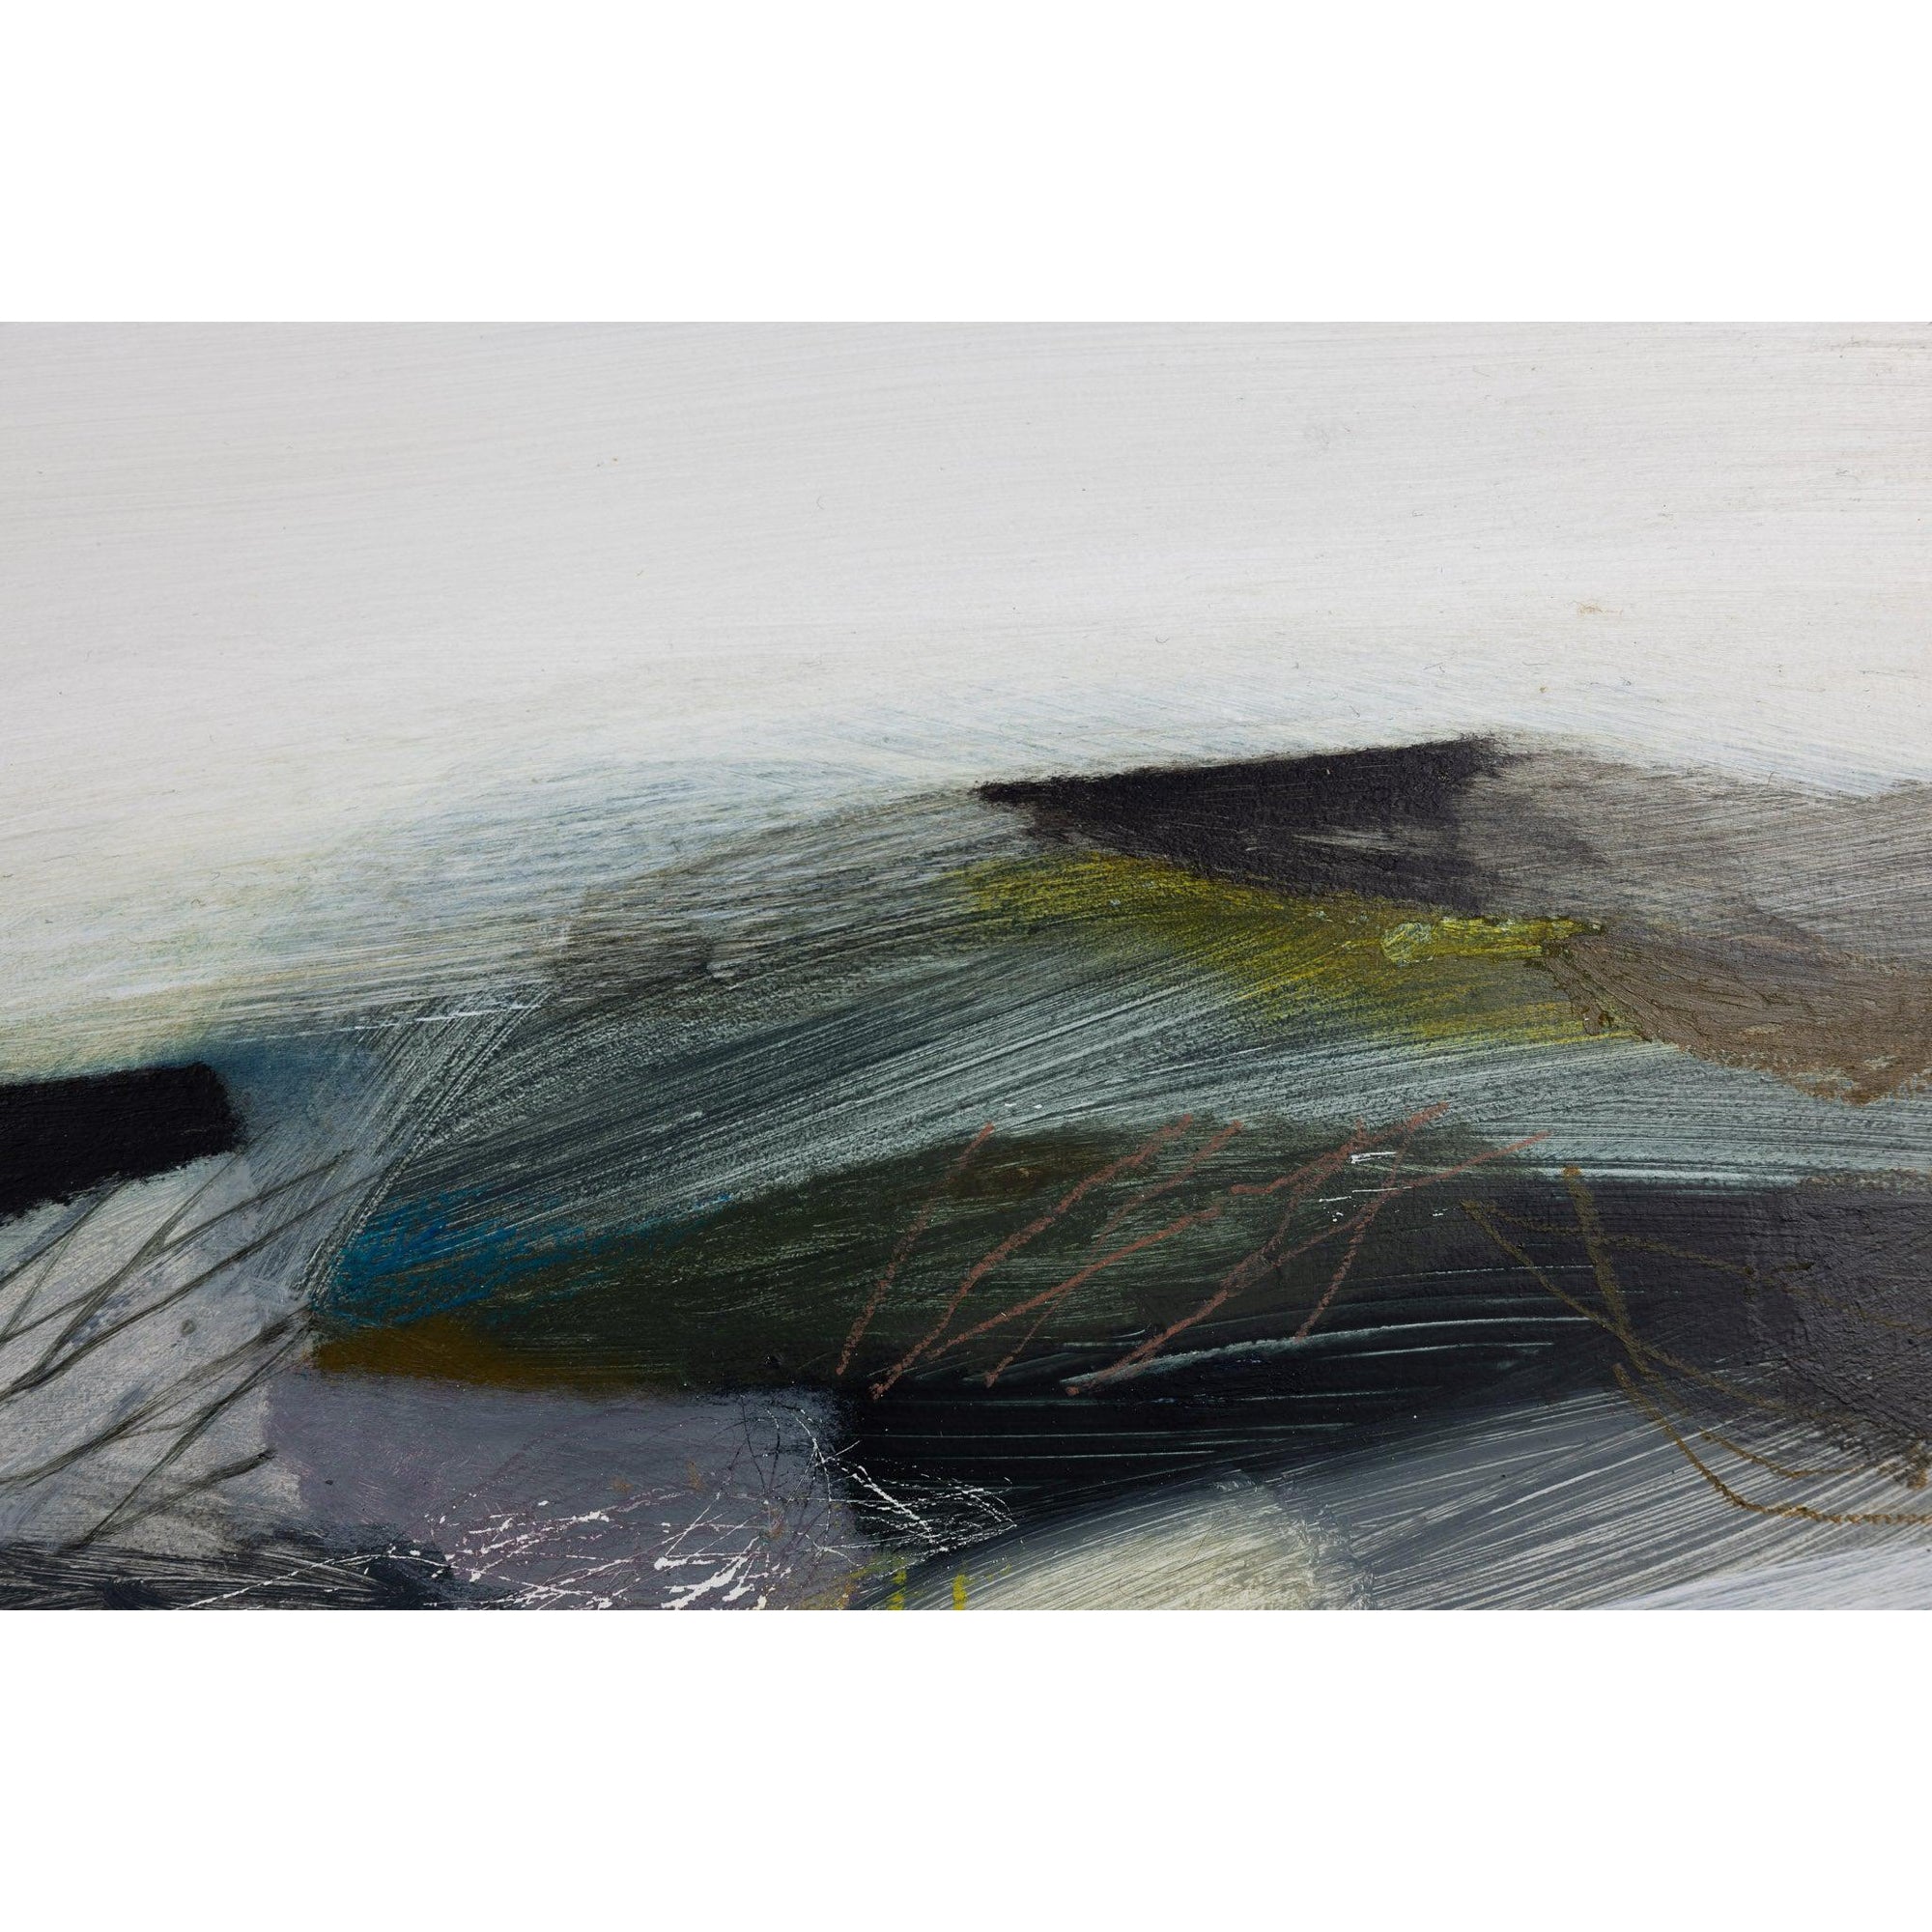 Shifting Colours 1, mixed media by Karen Birchwood, available from Padstow Gallery, Cornwall